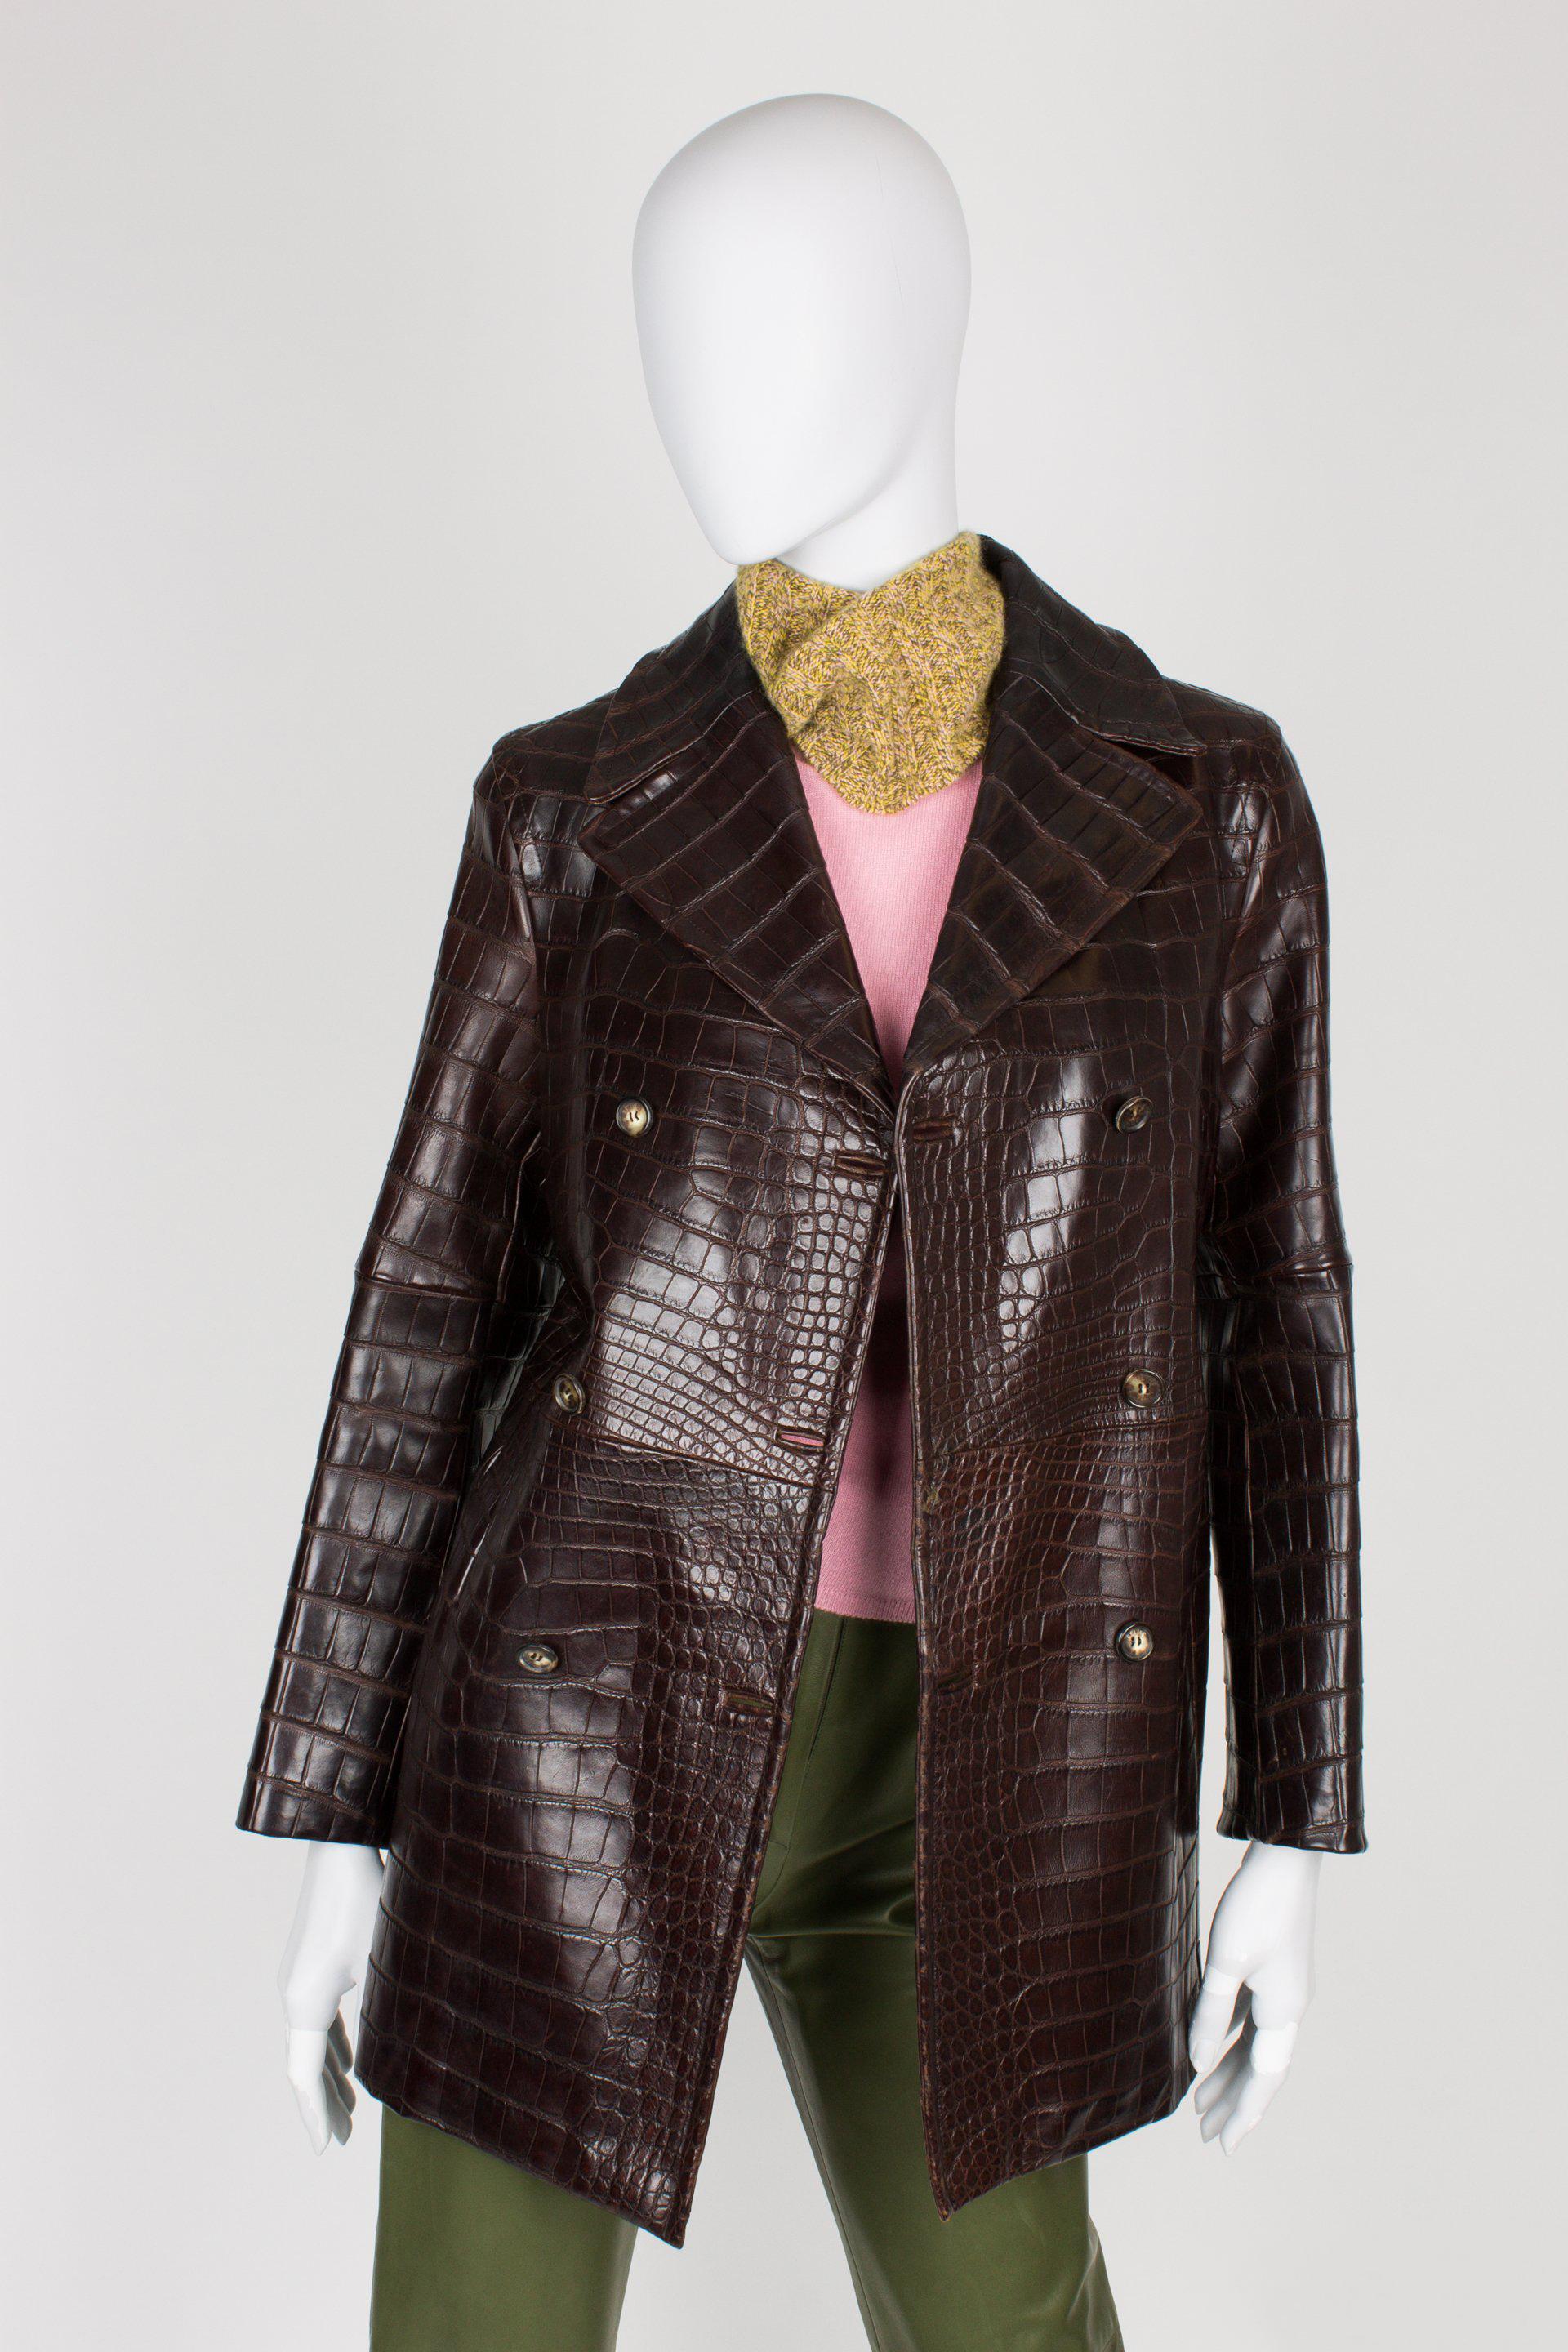 Double breasted coat by CELINE fully made of dark brown crocodile leather. Soooo beautiful!

Six button front closure, large lapels and two bound pockets on the hips. Fully lined with shiny brown fabric.

These coats were custom made by special